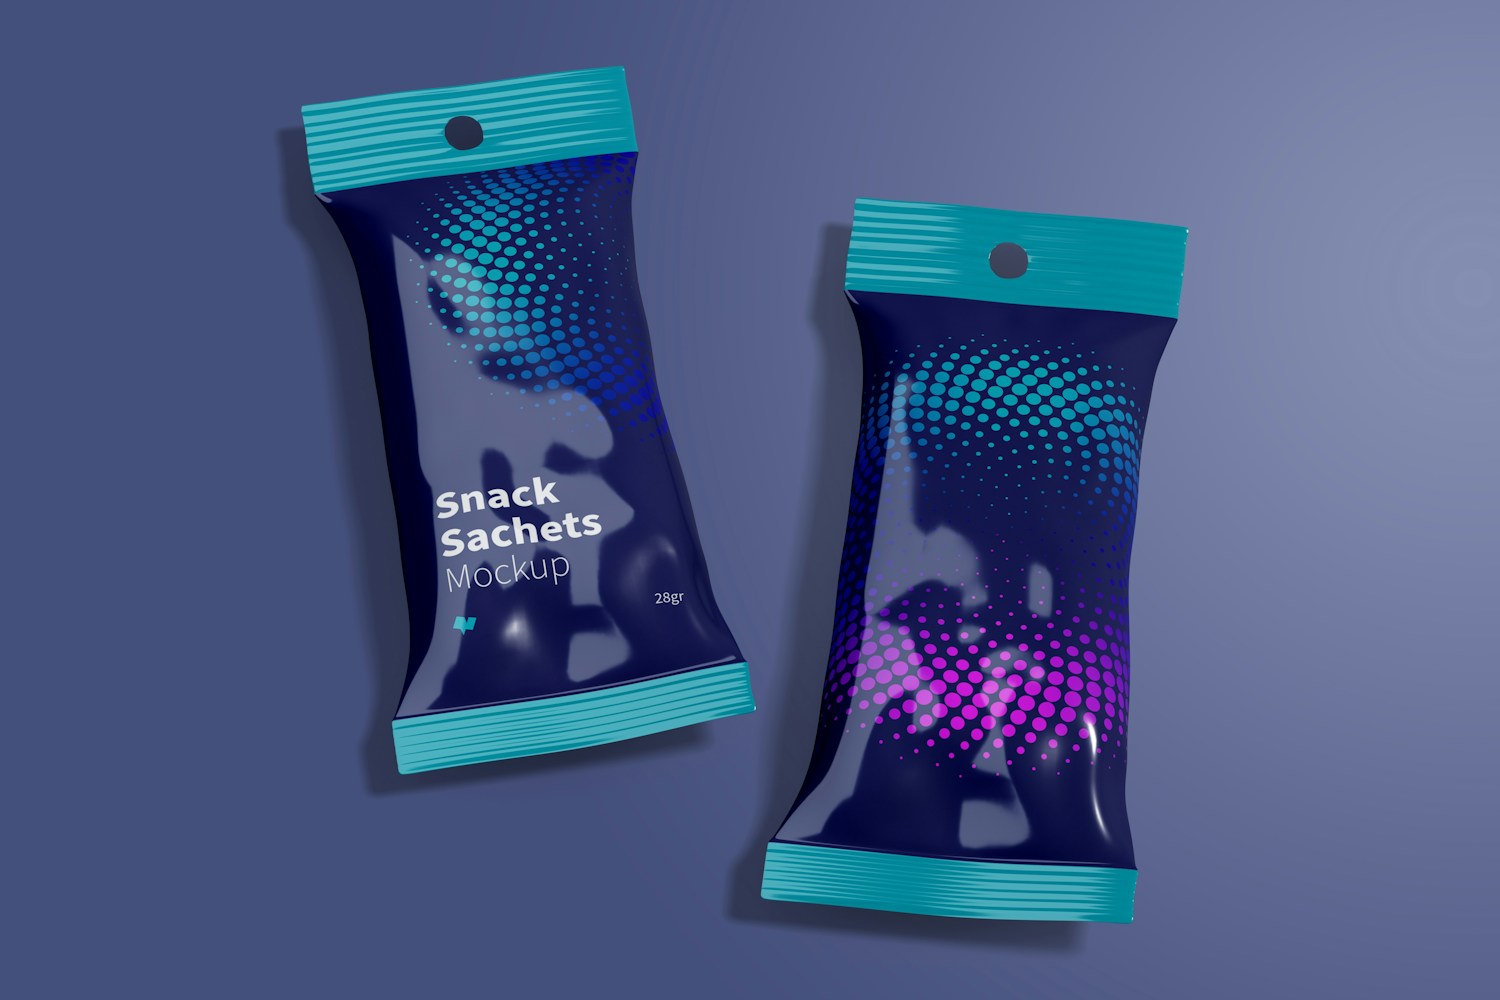 Glossy Snack Sachets Mockup, Perspective View